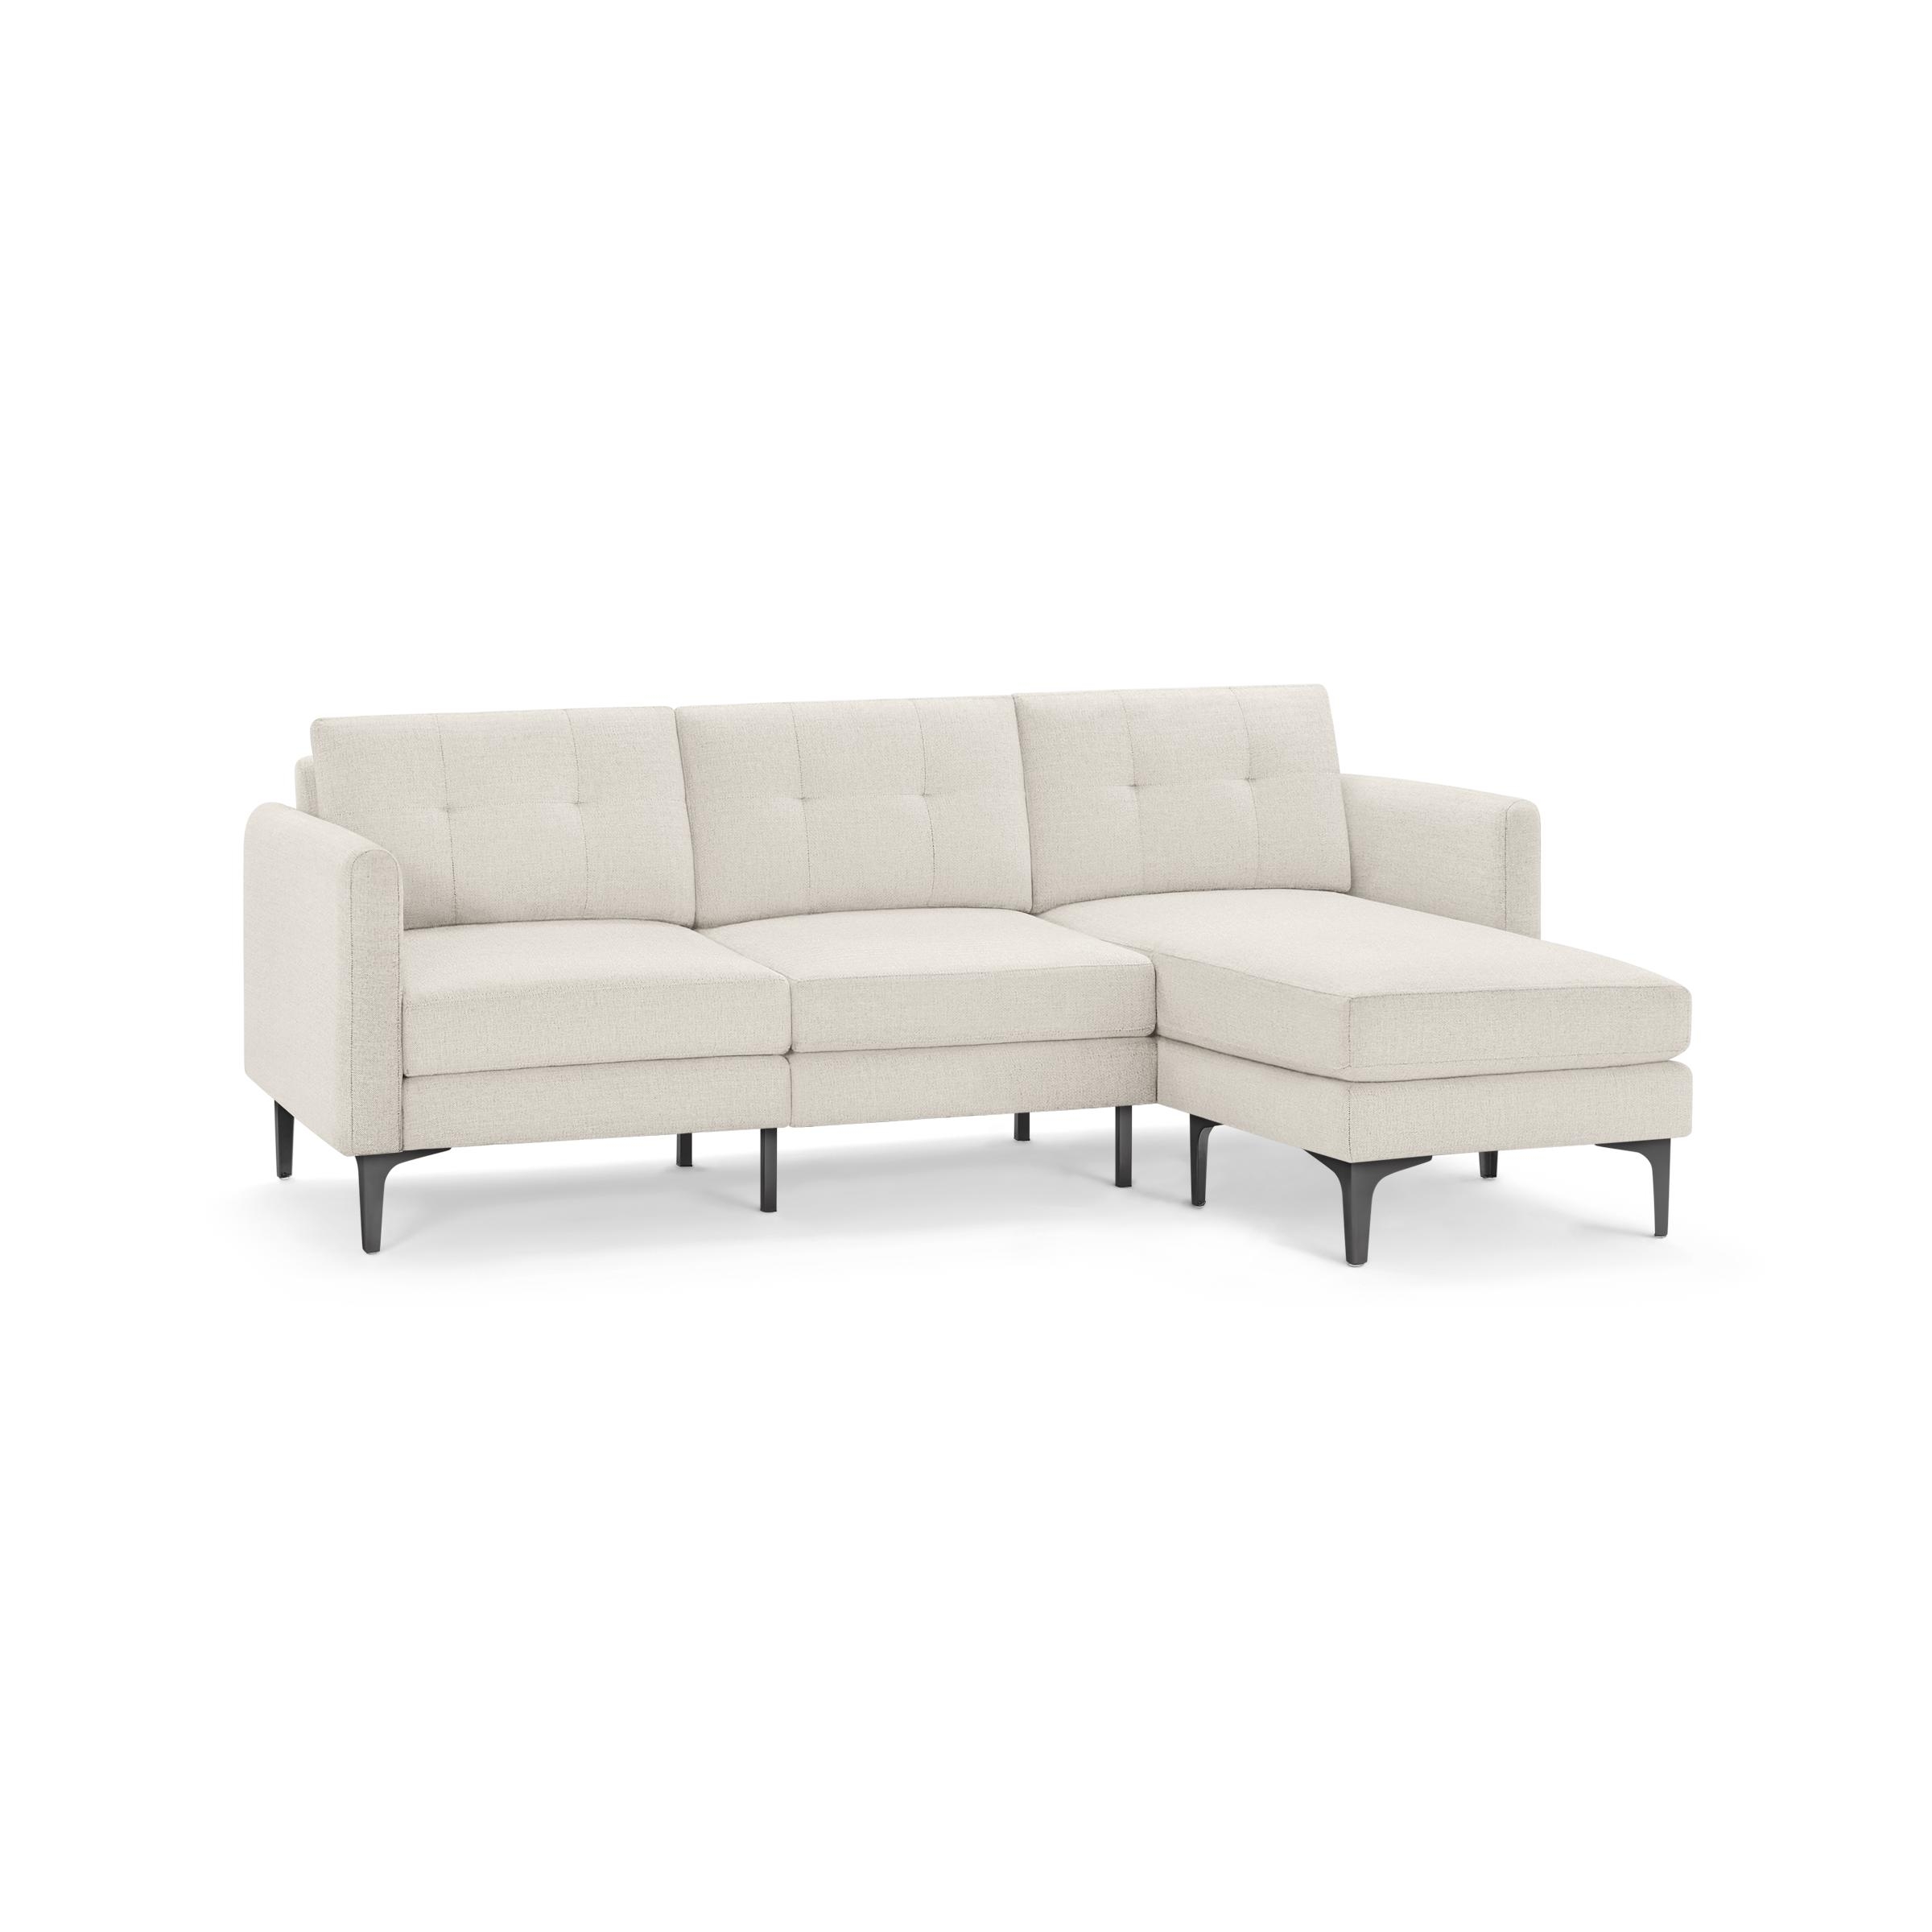 Nomad Sofa Sectional in Ivory, Black Metal Legs - Image 0